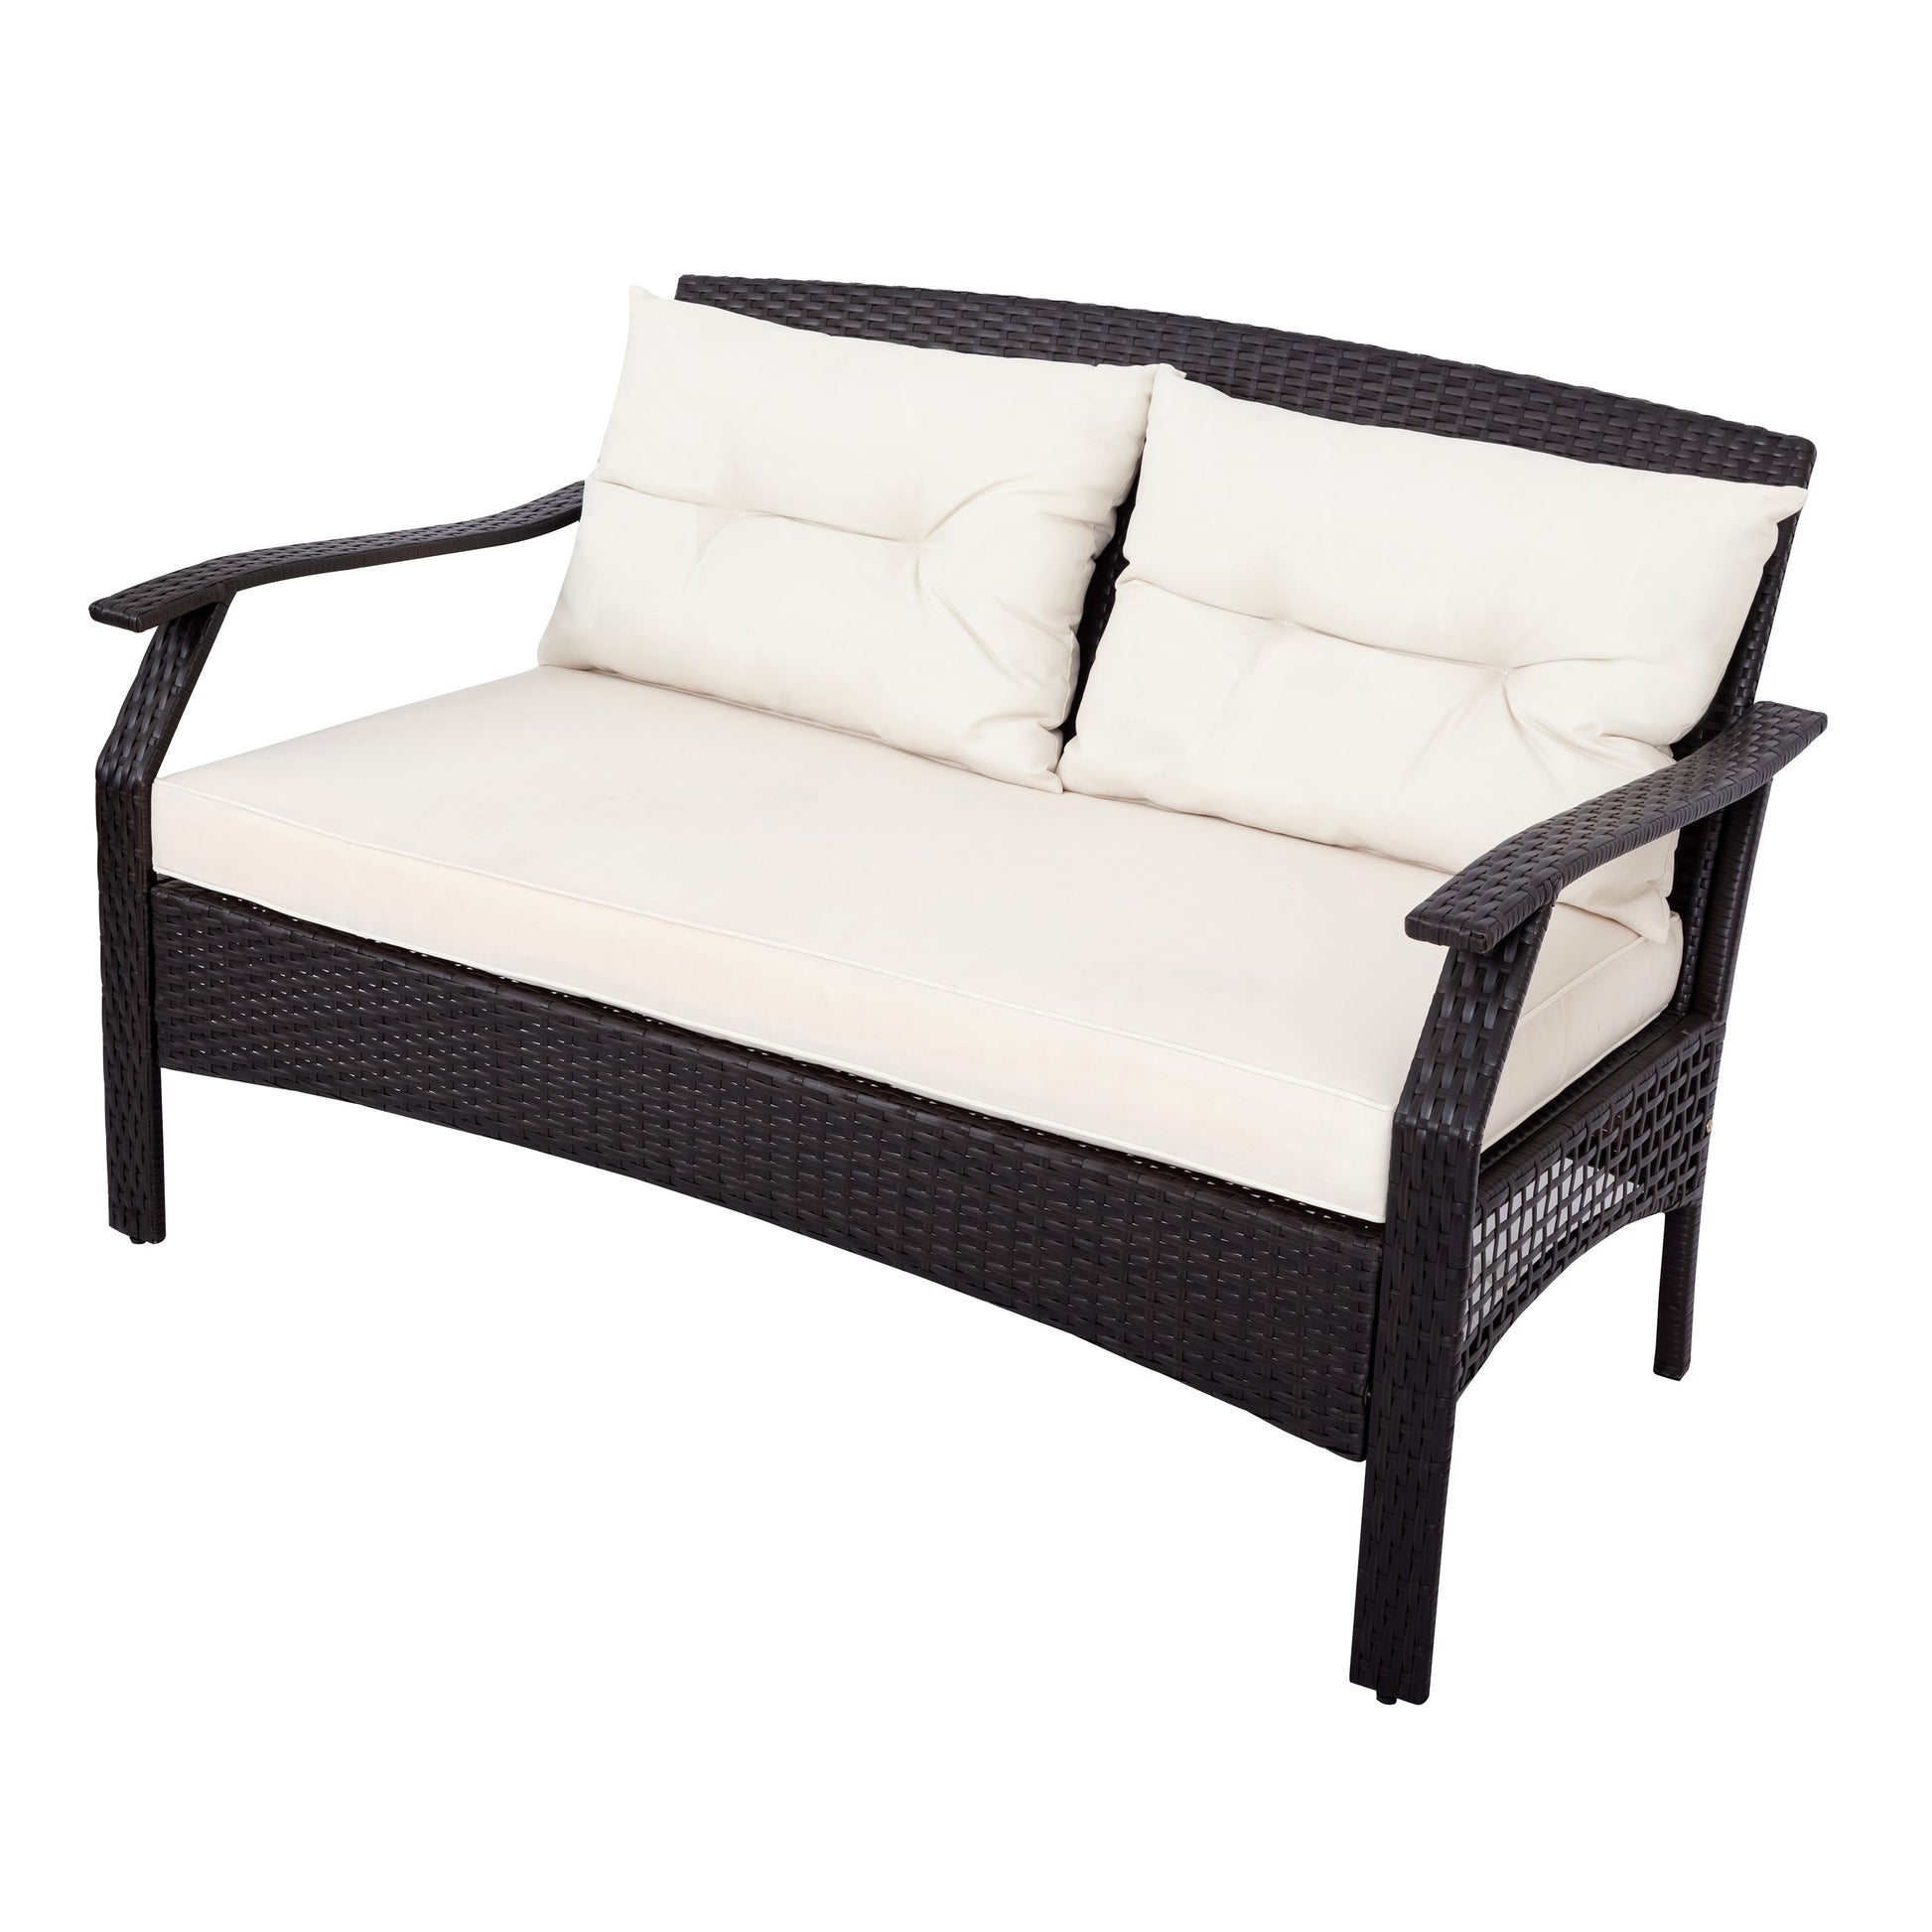 Rattan Sofa Seating Group with Cushions 4 pc - Demine Essentials